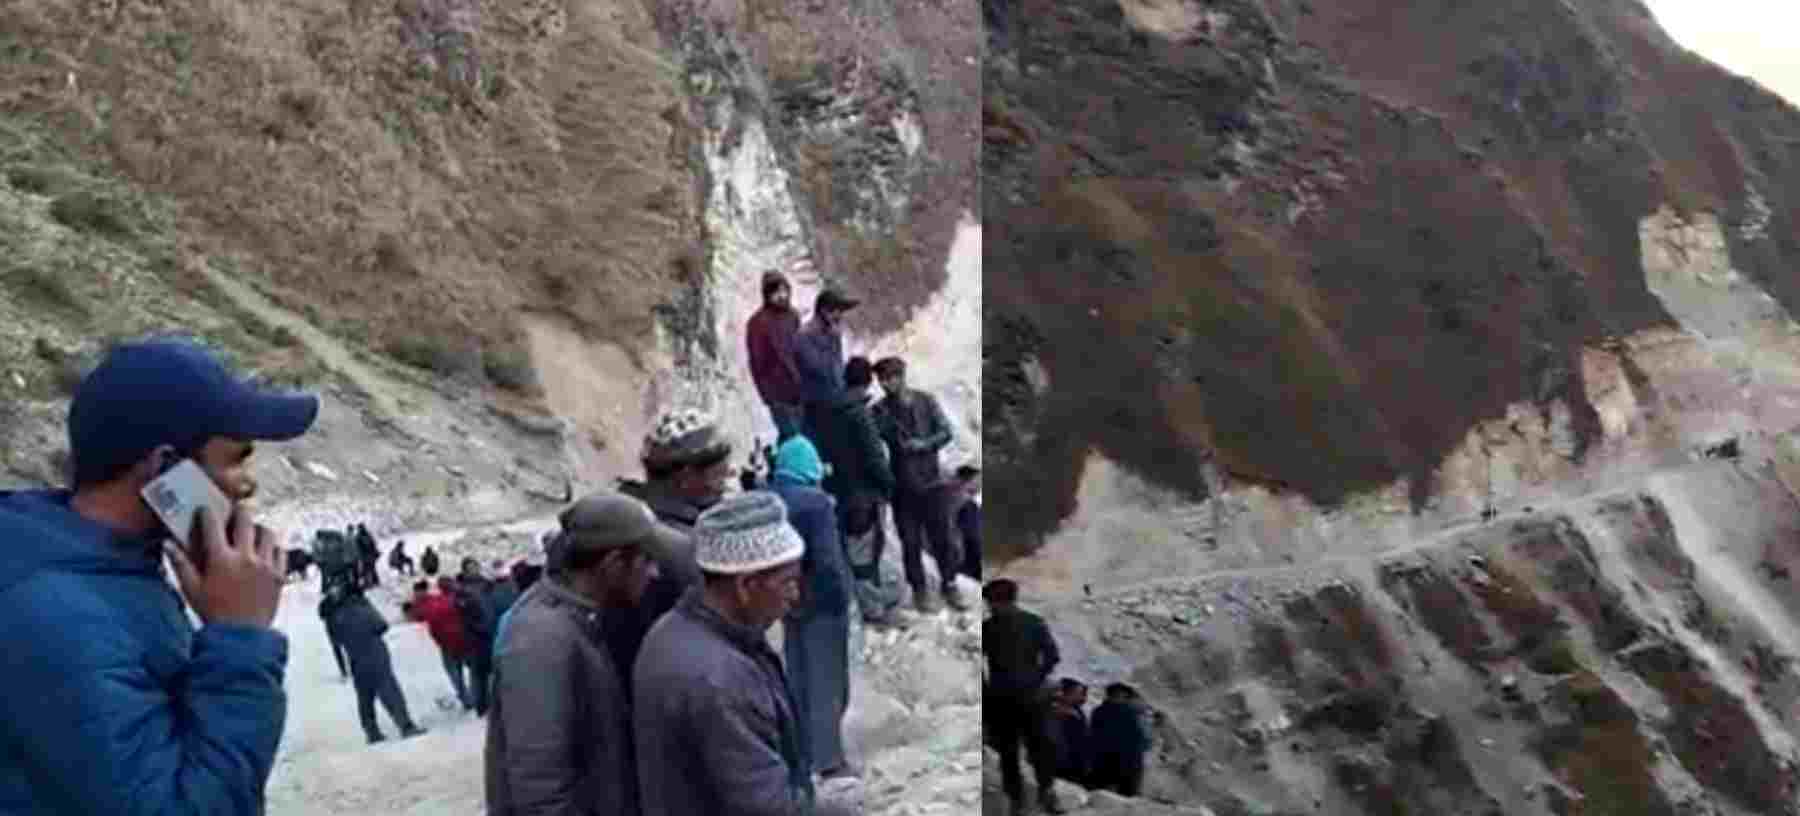 Uttarakhand latest news: on chamoli accident, 12 people died, rescue operation continues, CM expressed grief. chamoli accident latest news